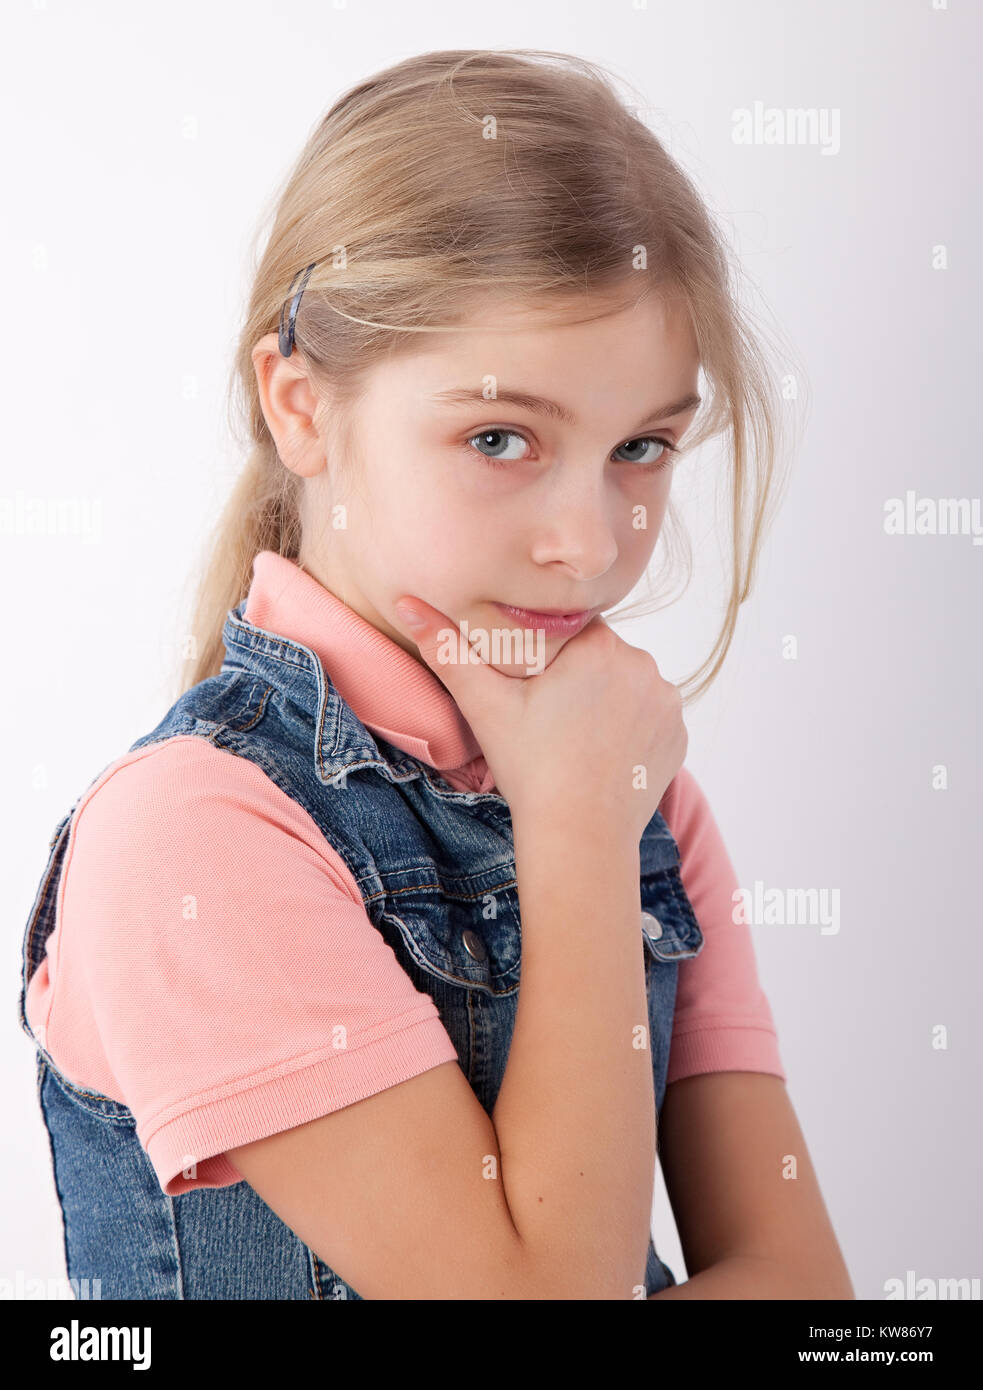 young girl with hand on chin Stock Photo